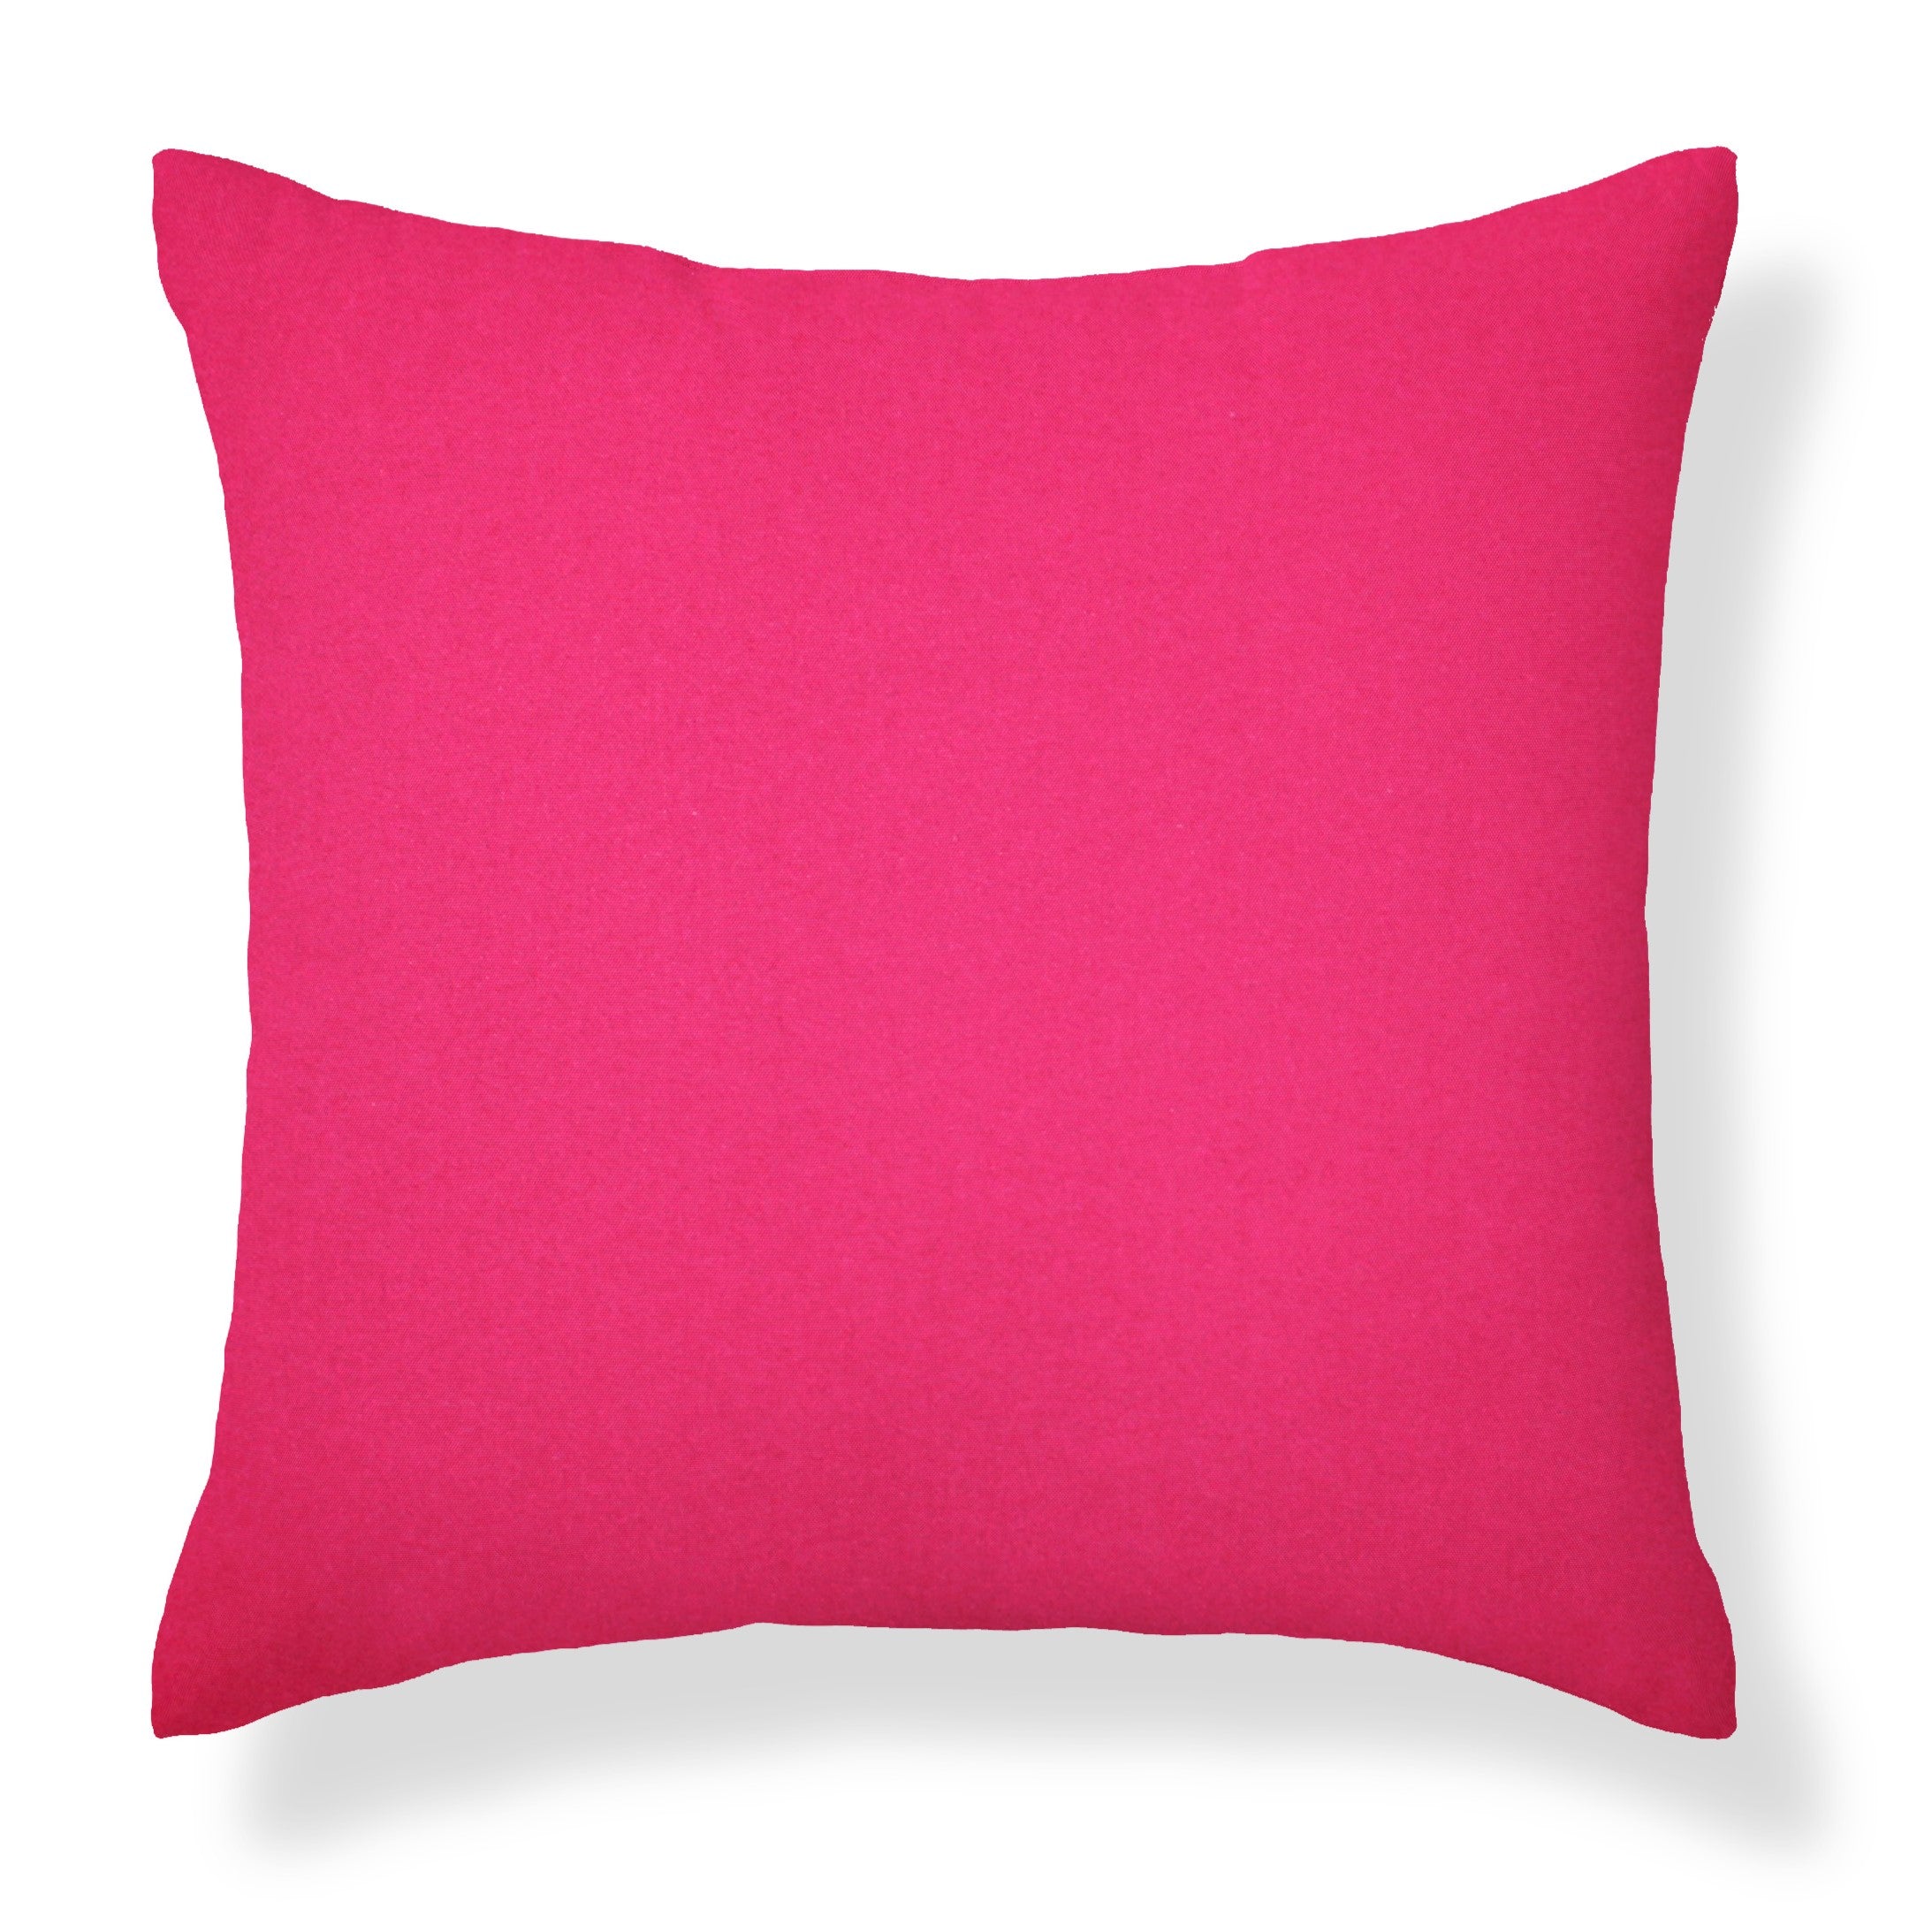 Set of 2 Premium Pink Garden Square Water Resistant Cushions